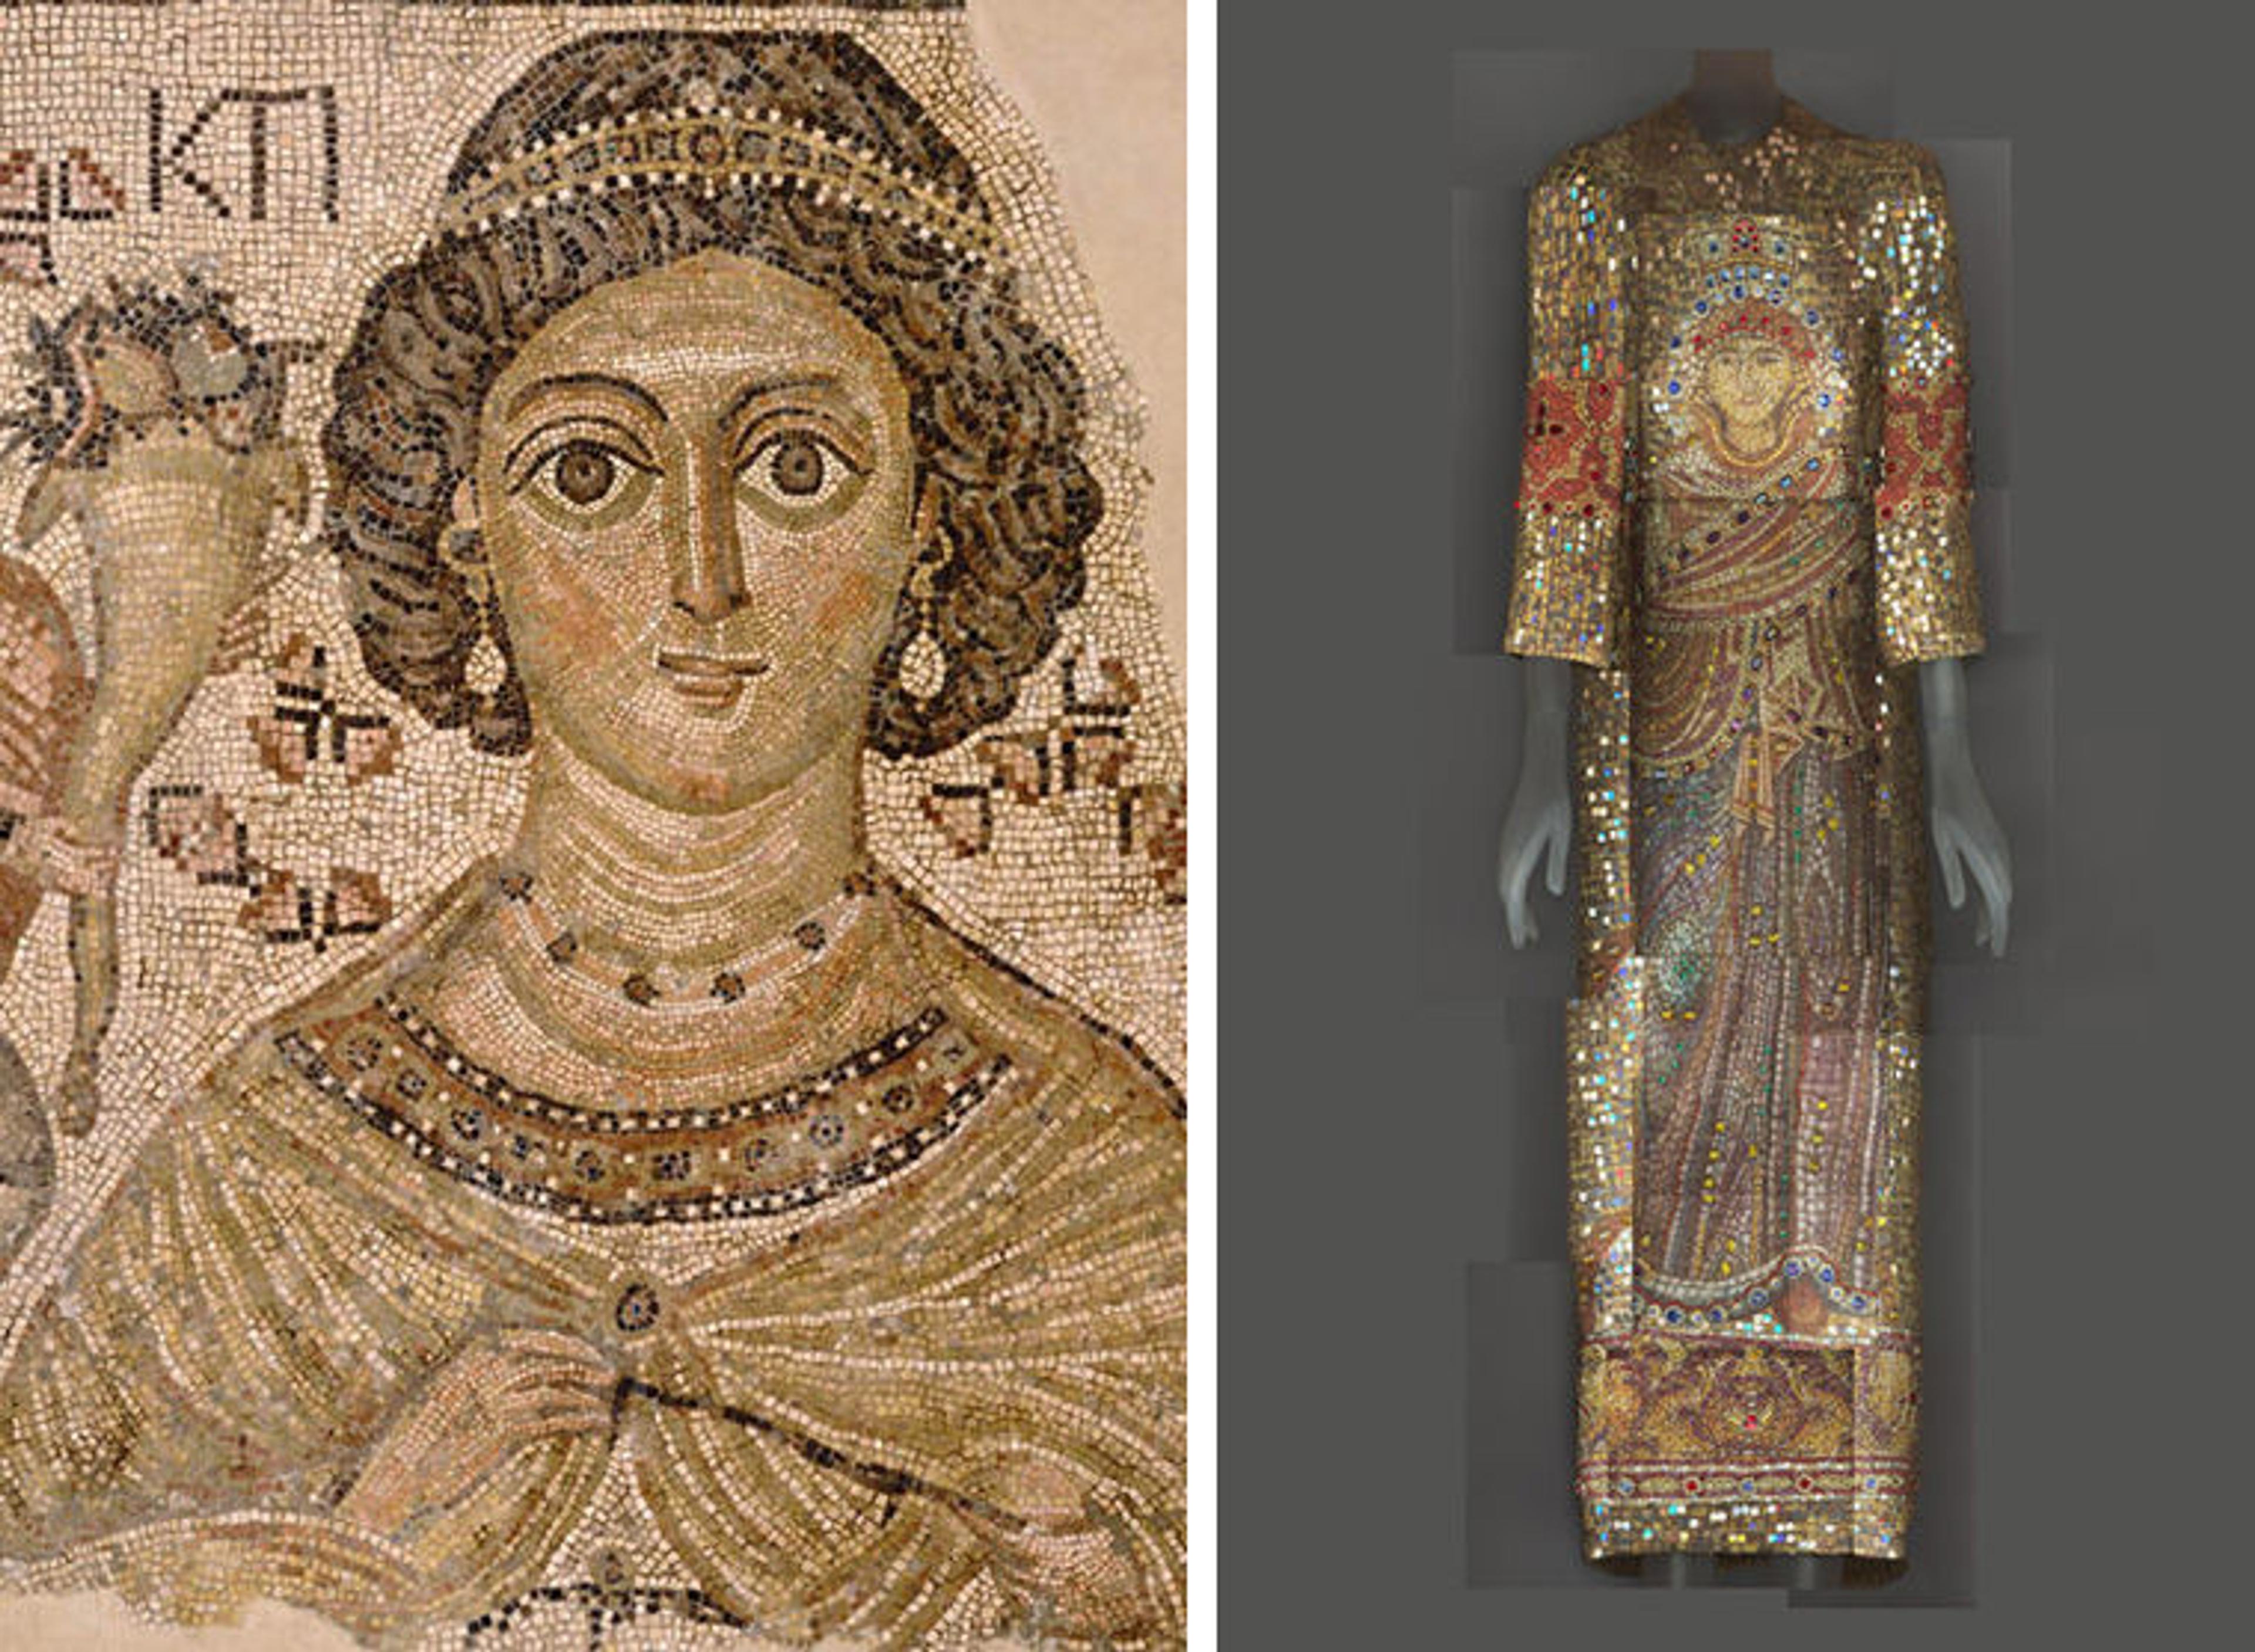 Fragment of a Byzantine floor mosaic displaying a woman's face at left, and a Dolce & Gabbana ensemble featuring a religious mosaic design at right